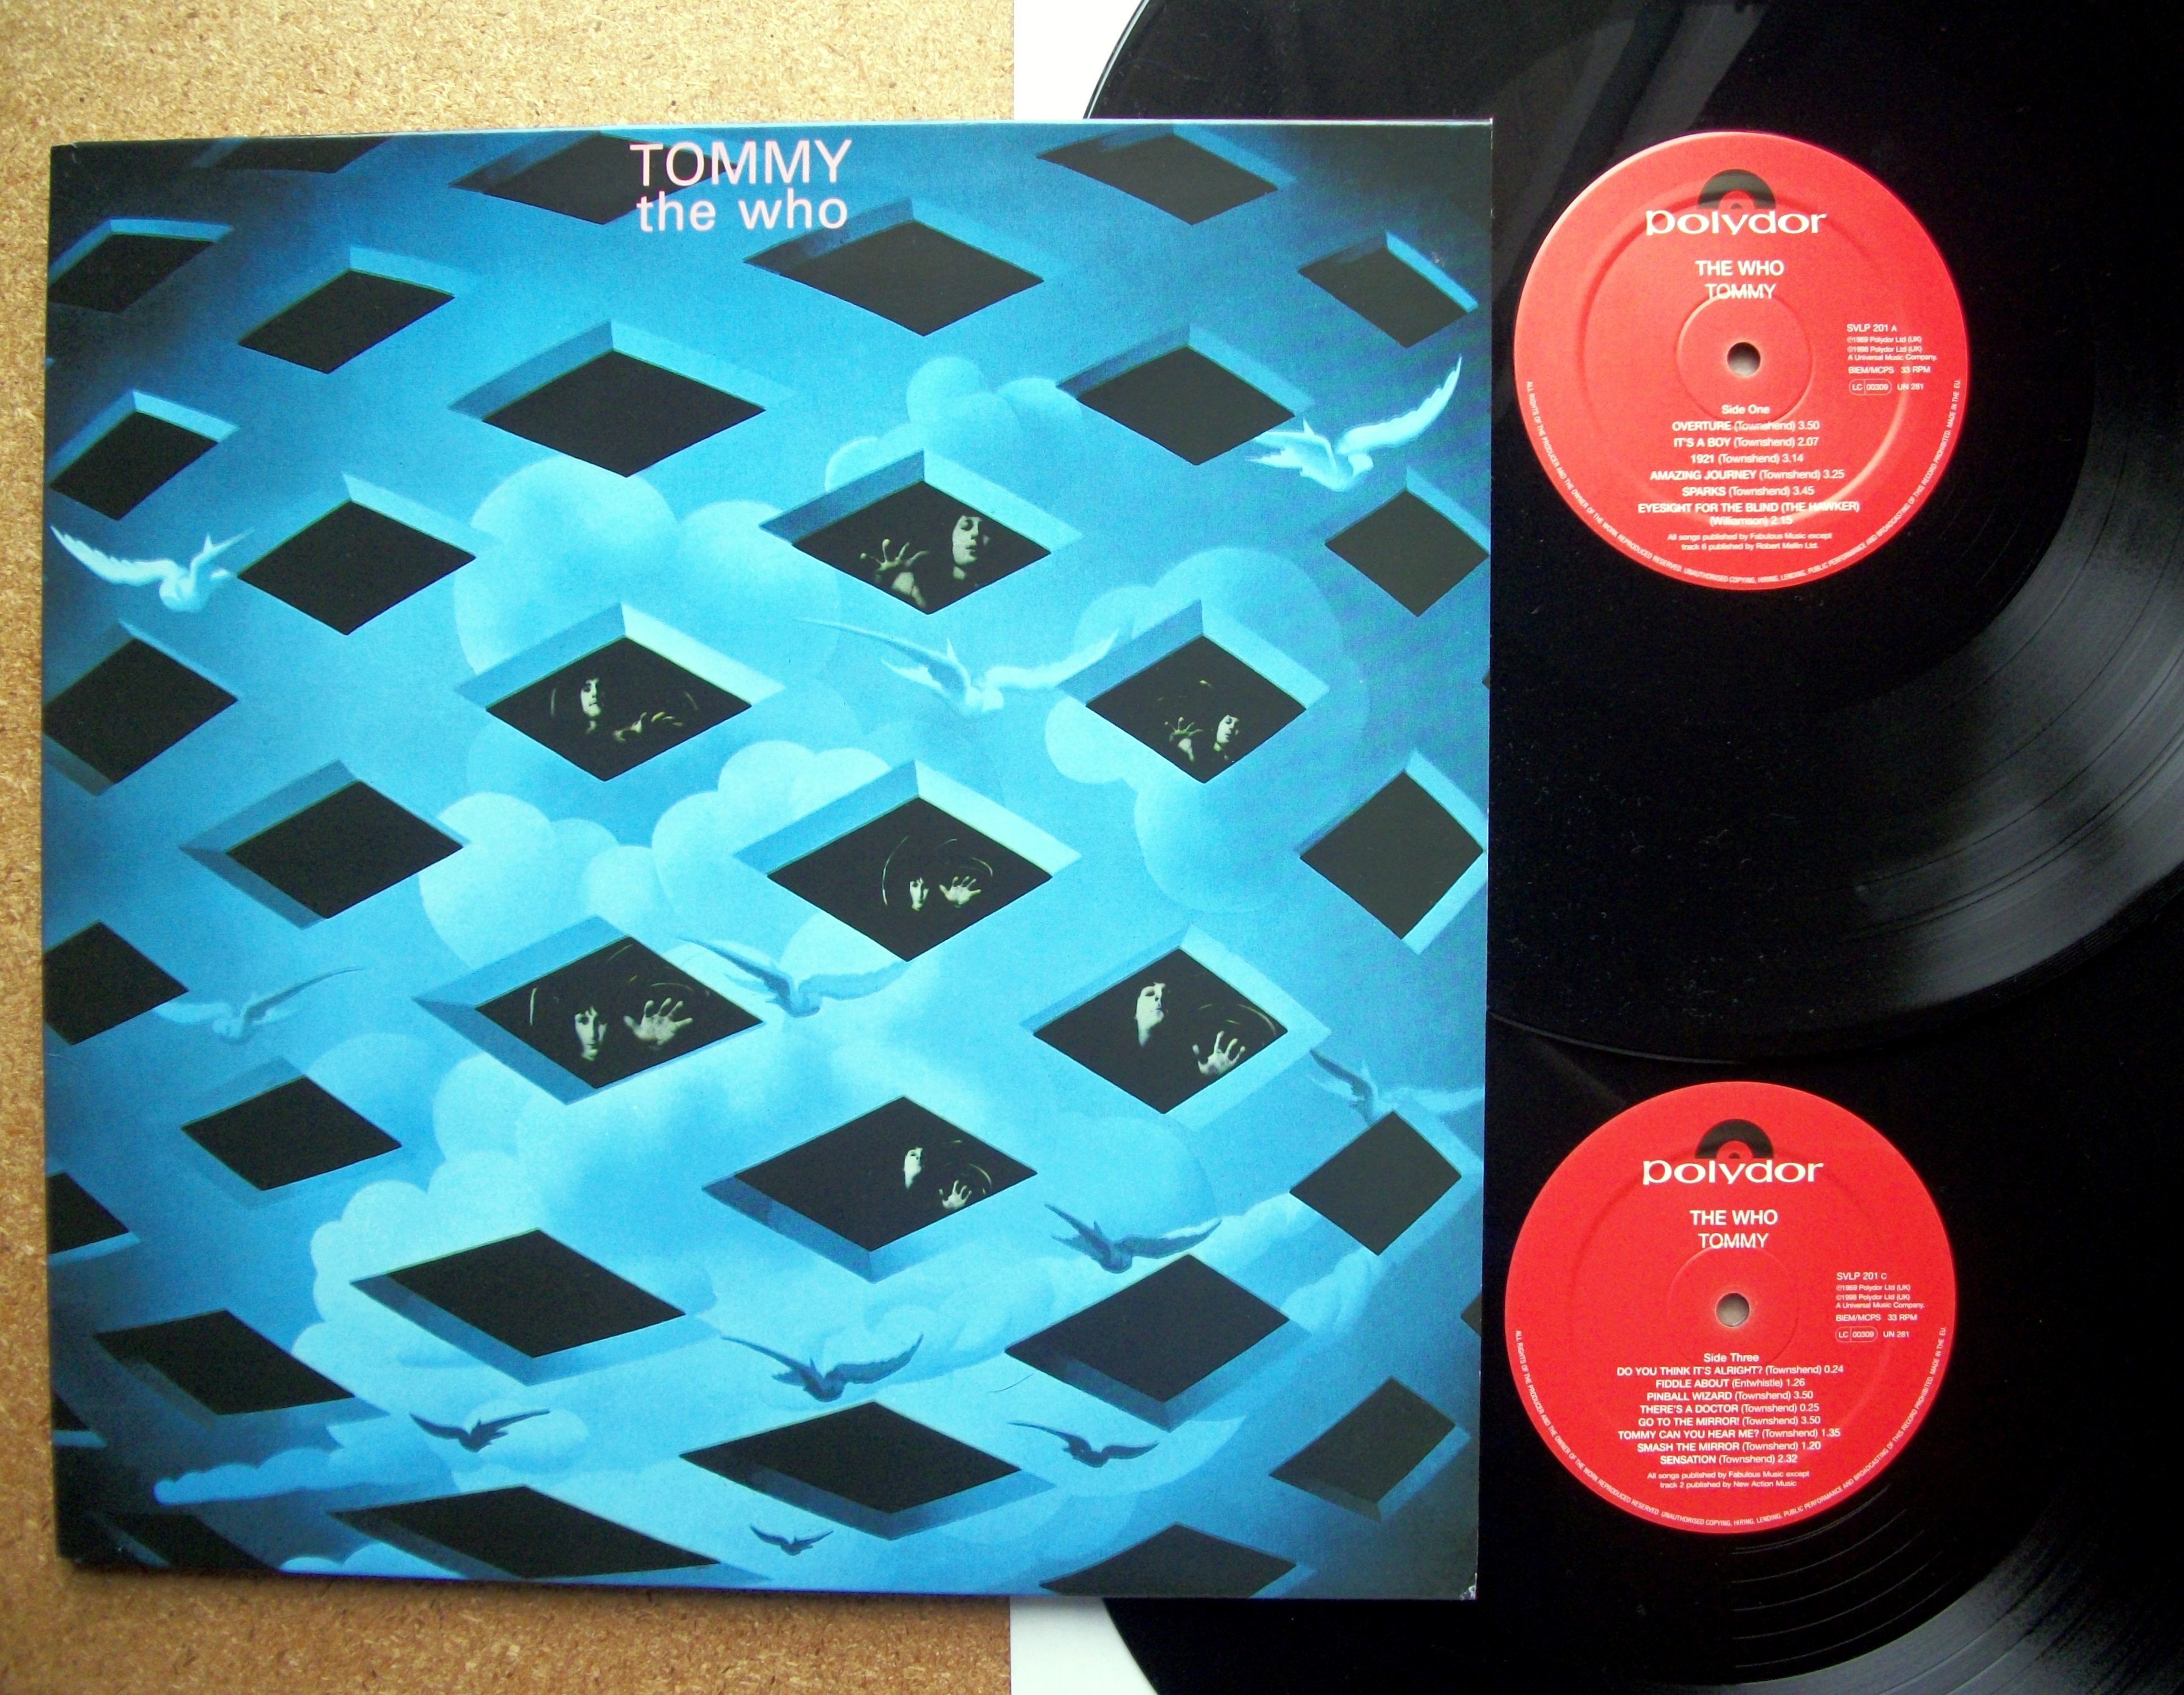 The who collection the who. The who Tommy обложка. Группа the who 1969. Tommy, 1969. The who Tommy 1969 (Full album).